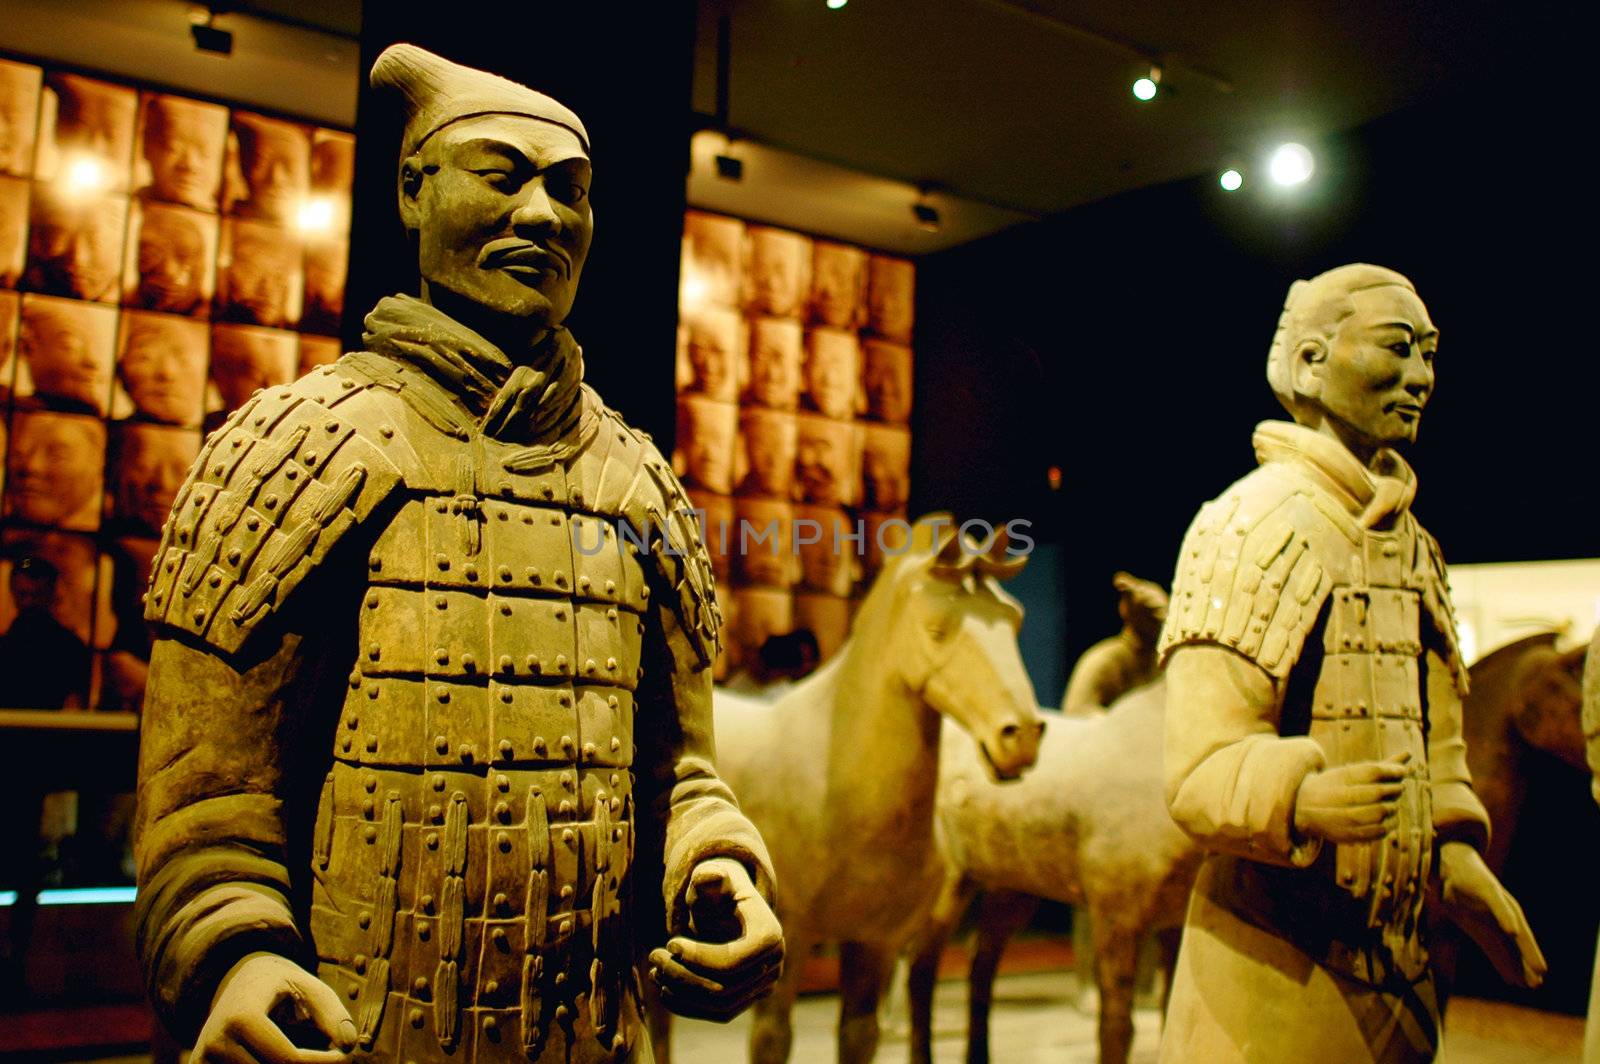 Famous Terracotta warriors and horses in Xian China